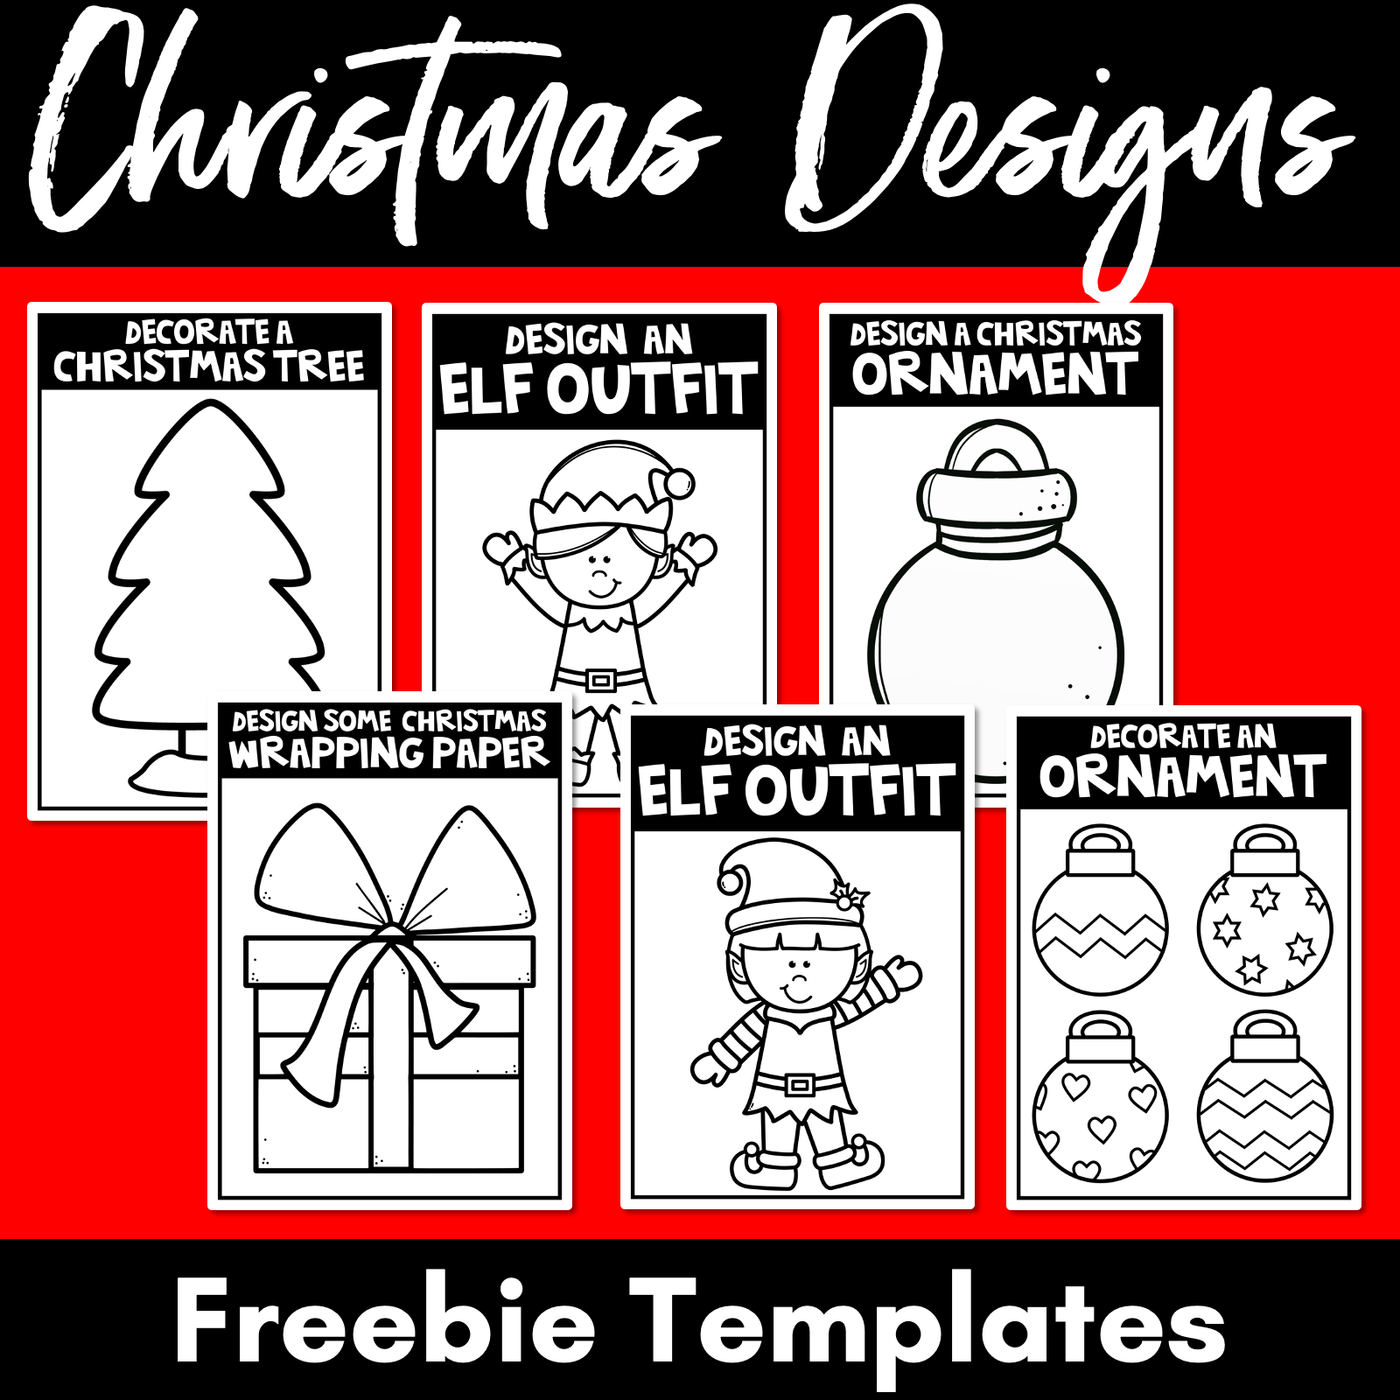 Christmas Coloring & Design Pages FREEBIE